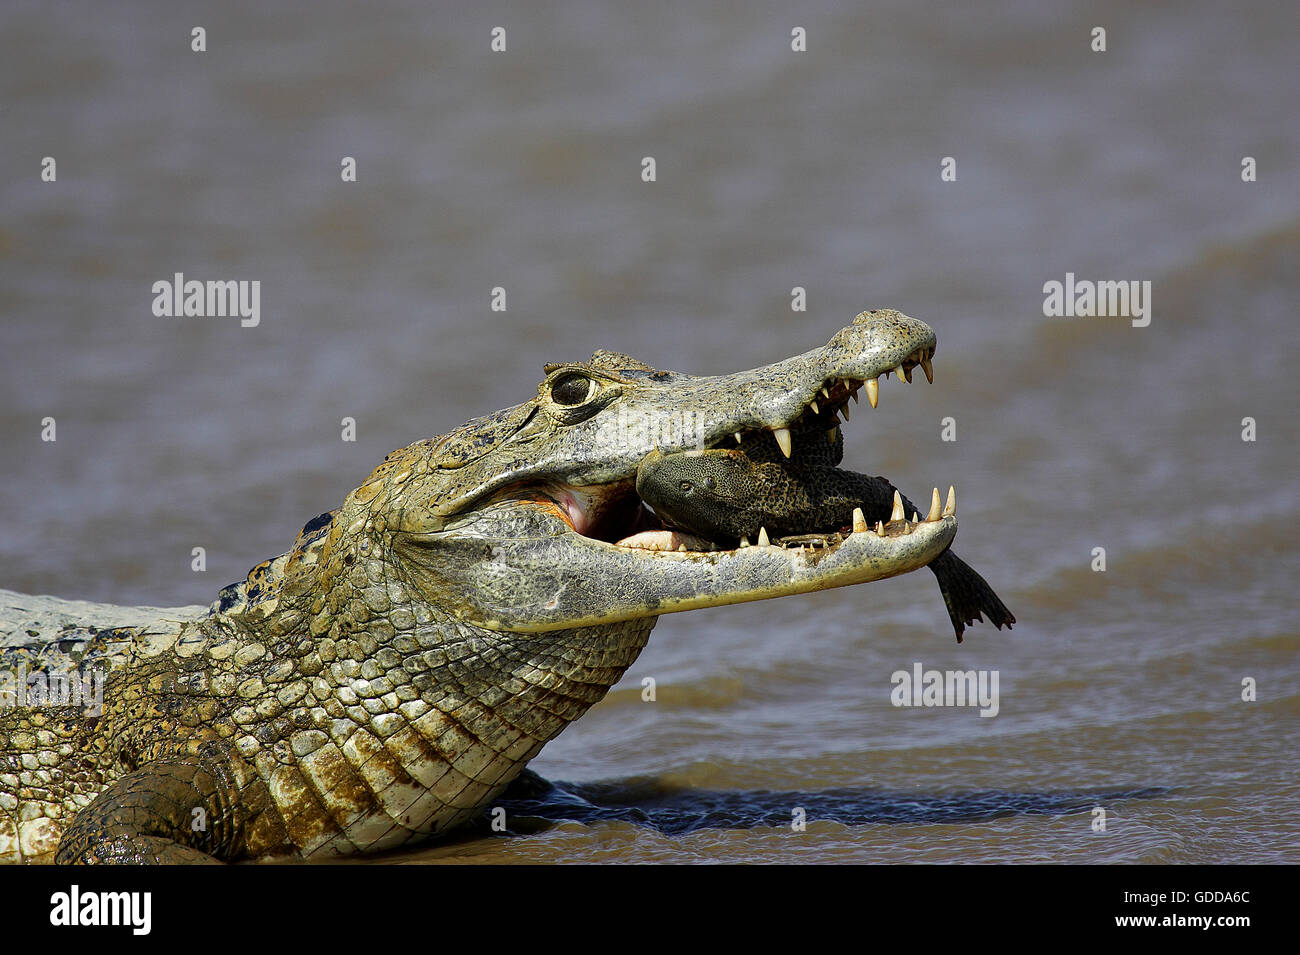 Spectacled Caiman, caiman crocodilus, Adult Catching Fish, Los Lianos in Venezuela Stock Photo